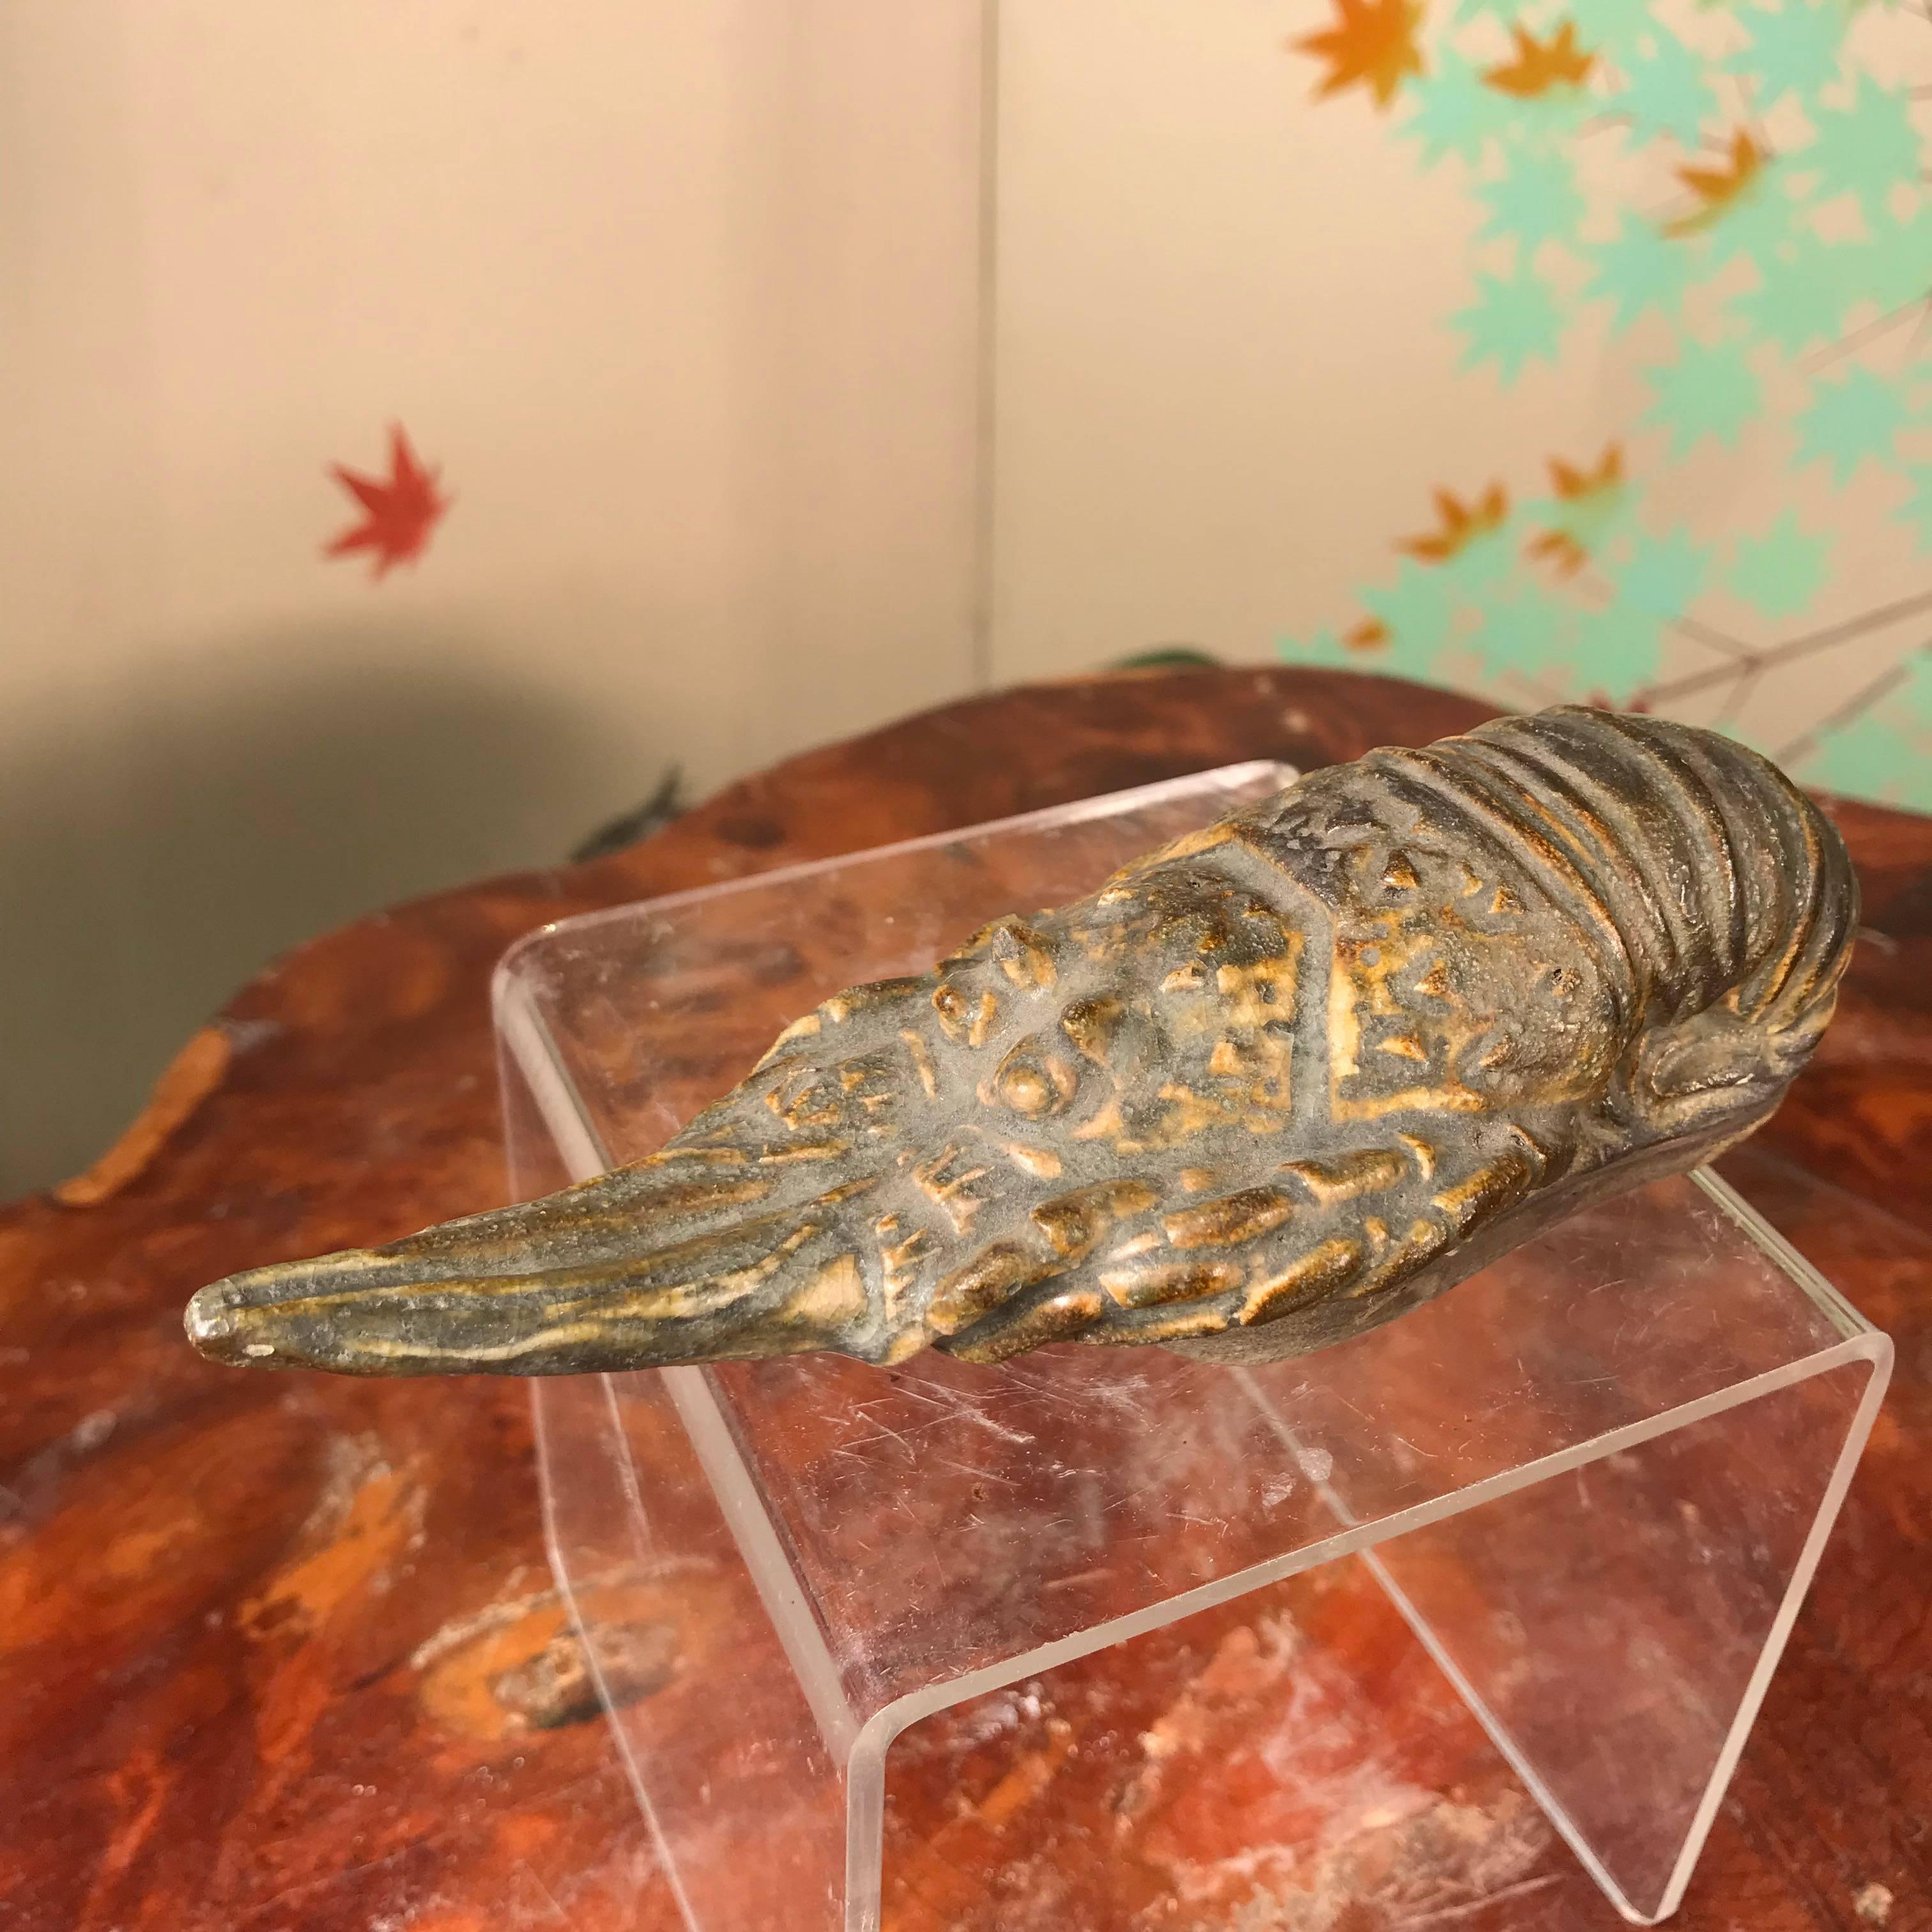 A fine Japanese handcrafted spiny lobster two piece box hand cast in ceramic and signed on base.

Rarely found, this sculptural Okimono came from an old Tokyo collection. Very fine condition from likely the Seto kiln. Today these older works of art